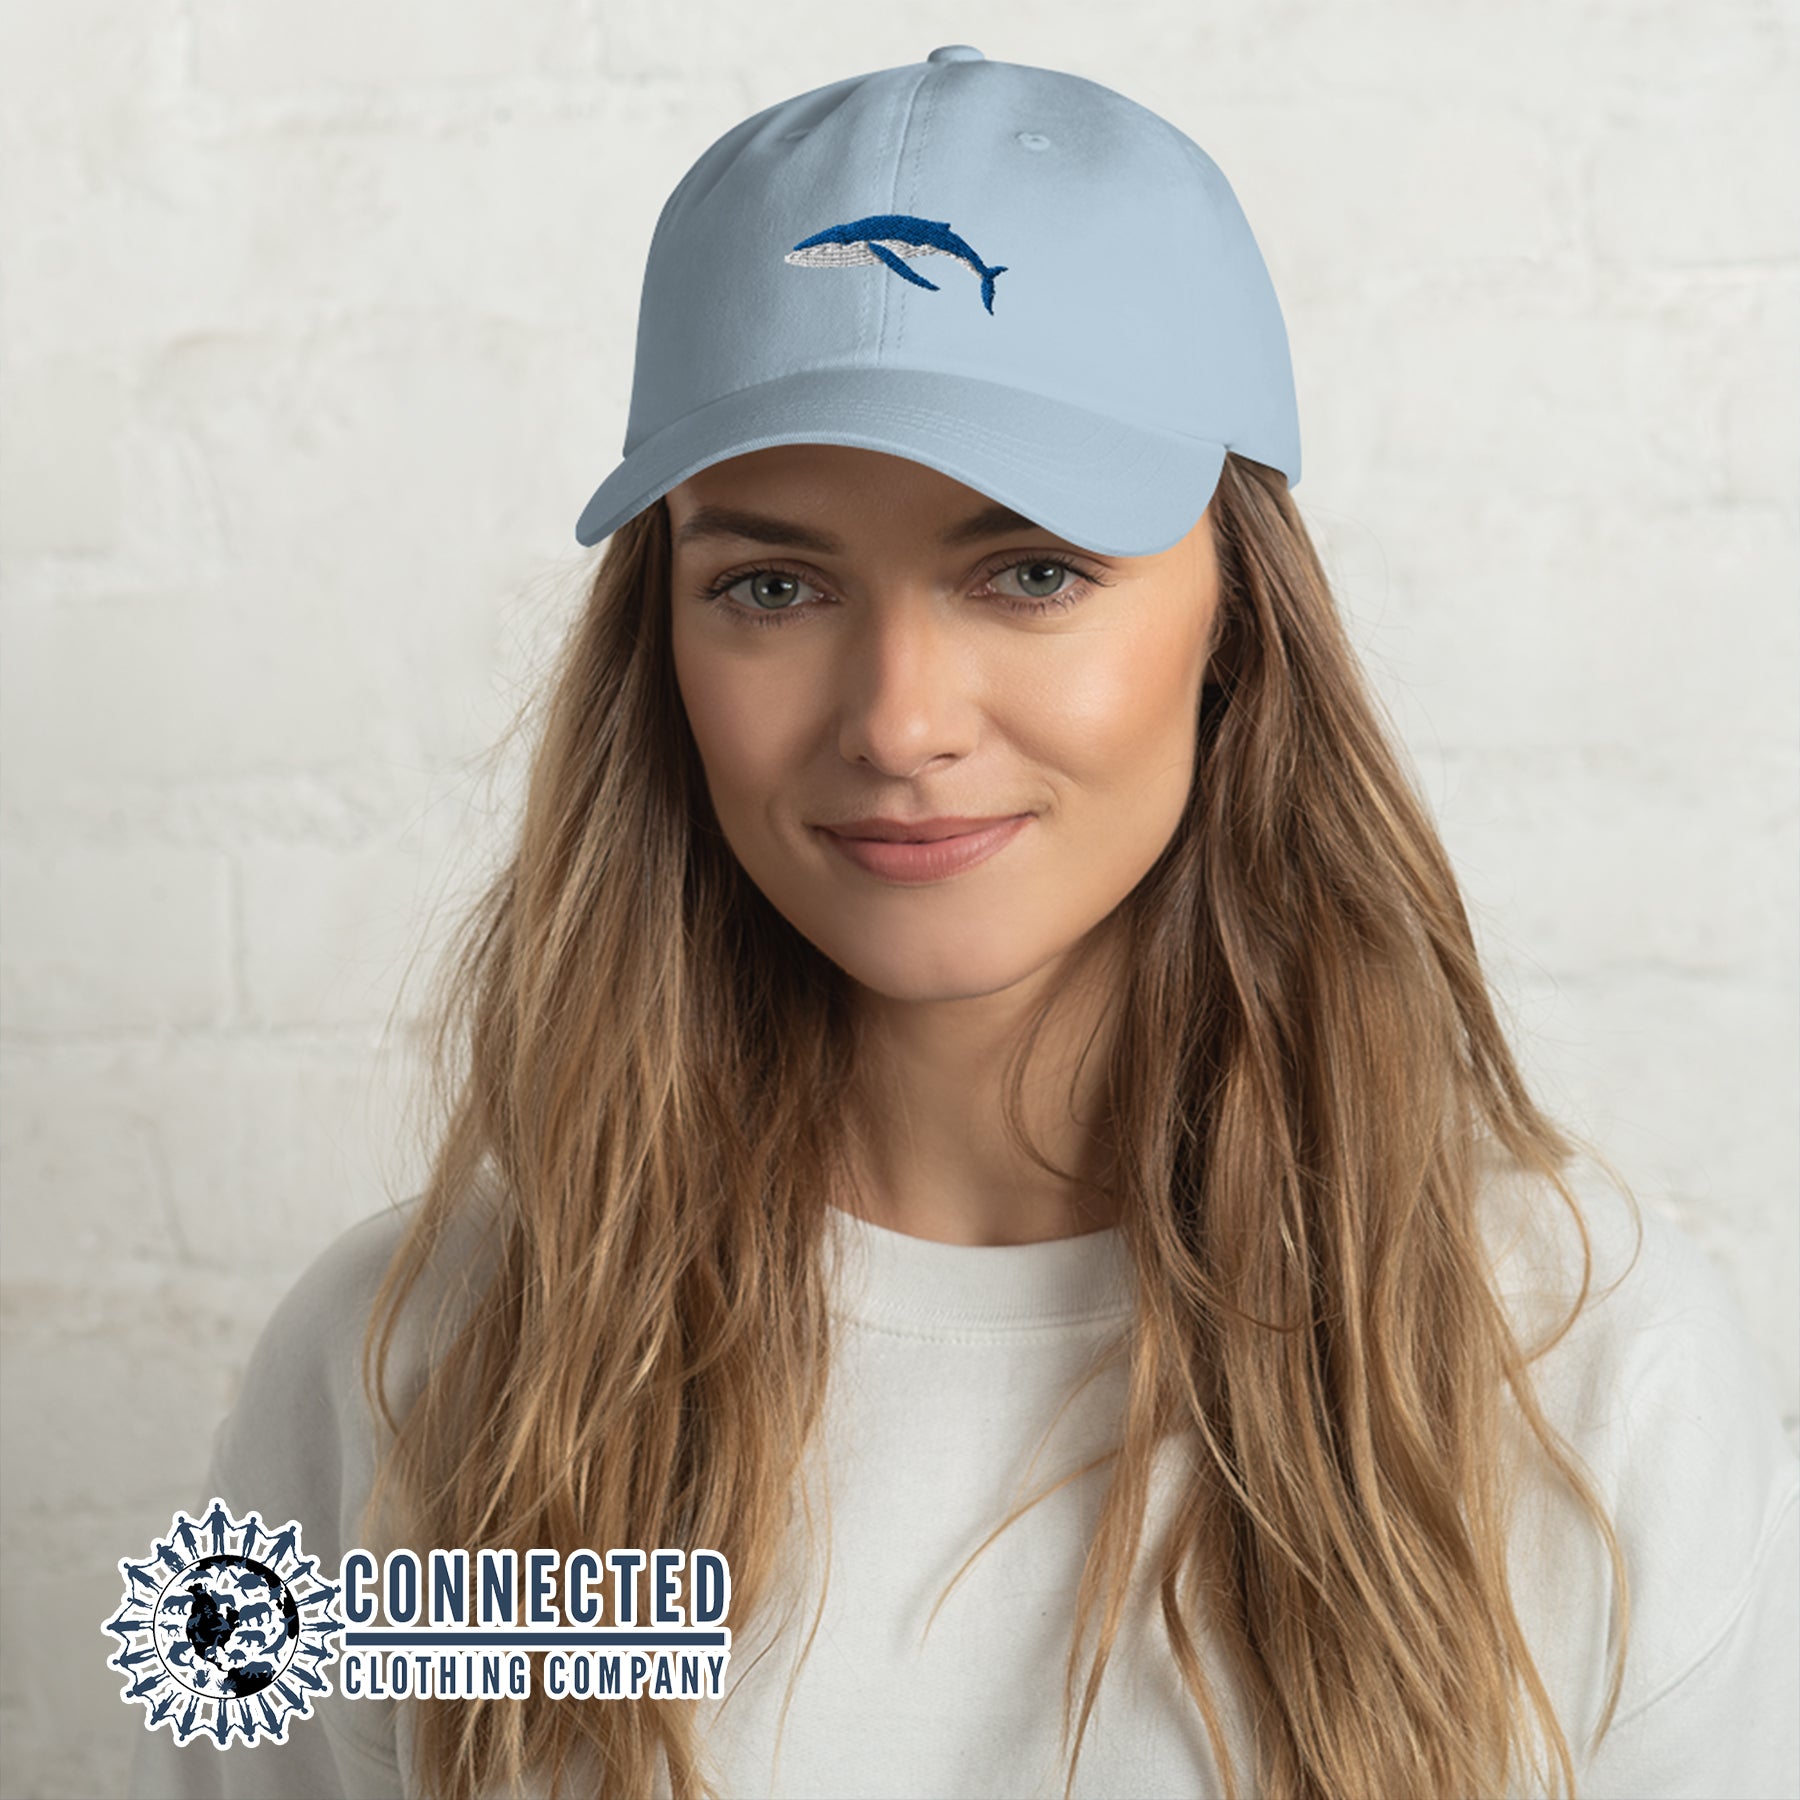 Model Wearing Blue Humpback Whale Cotton Cap - sweetsherriloudesigns - 10% of profits donated to Mission Blue ocean conservation